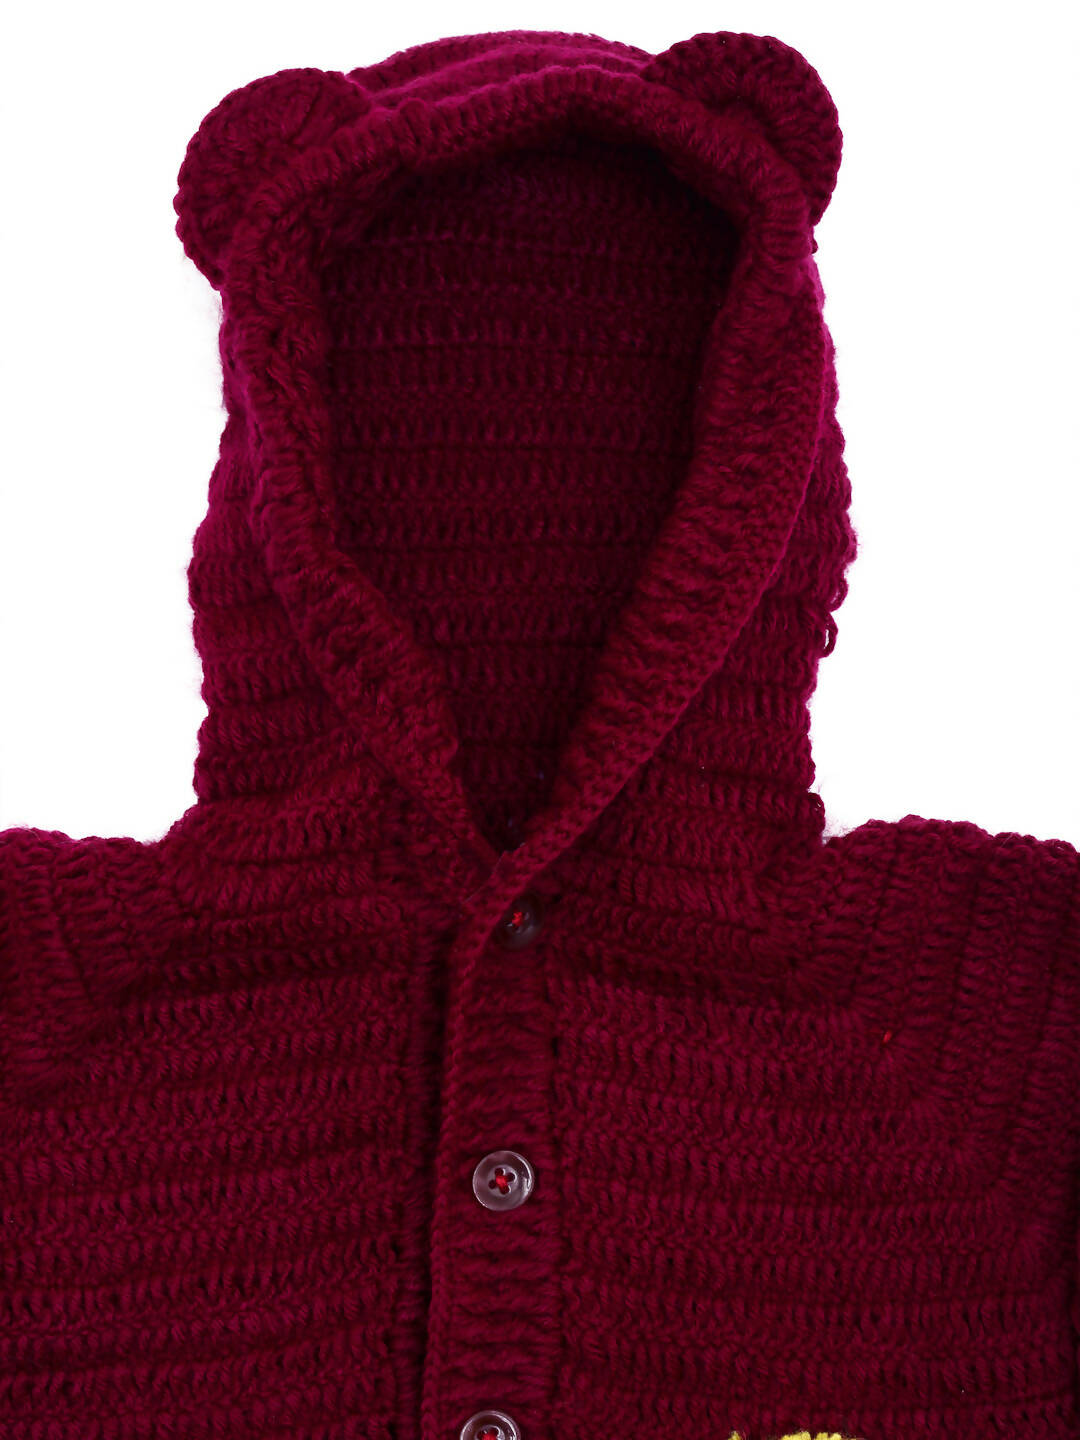 Chutput Kids Maroon Coloured Solid Pullover For Baby Boys Sweater For Baby Boys - Distacart